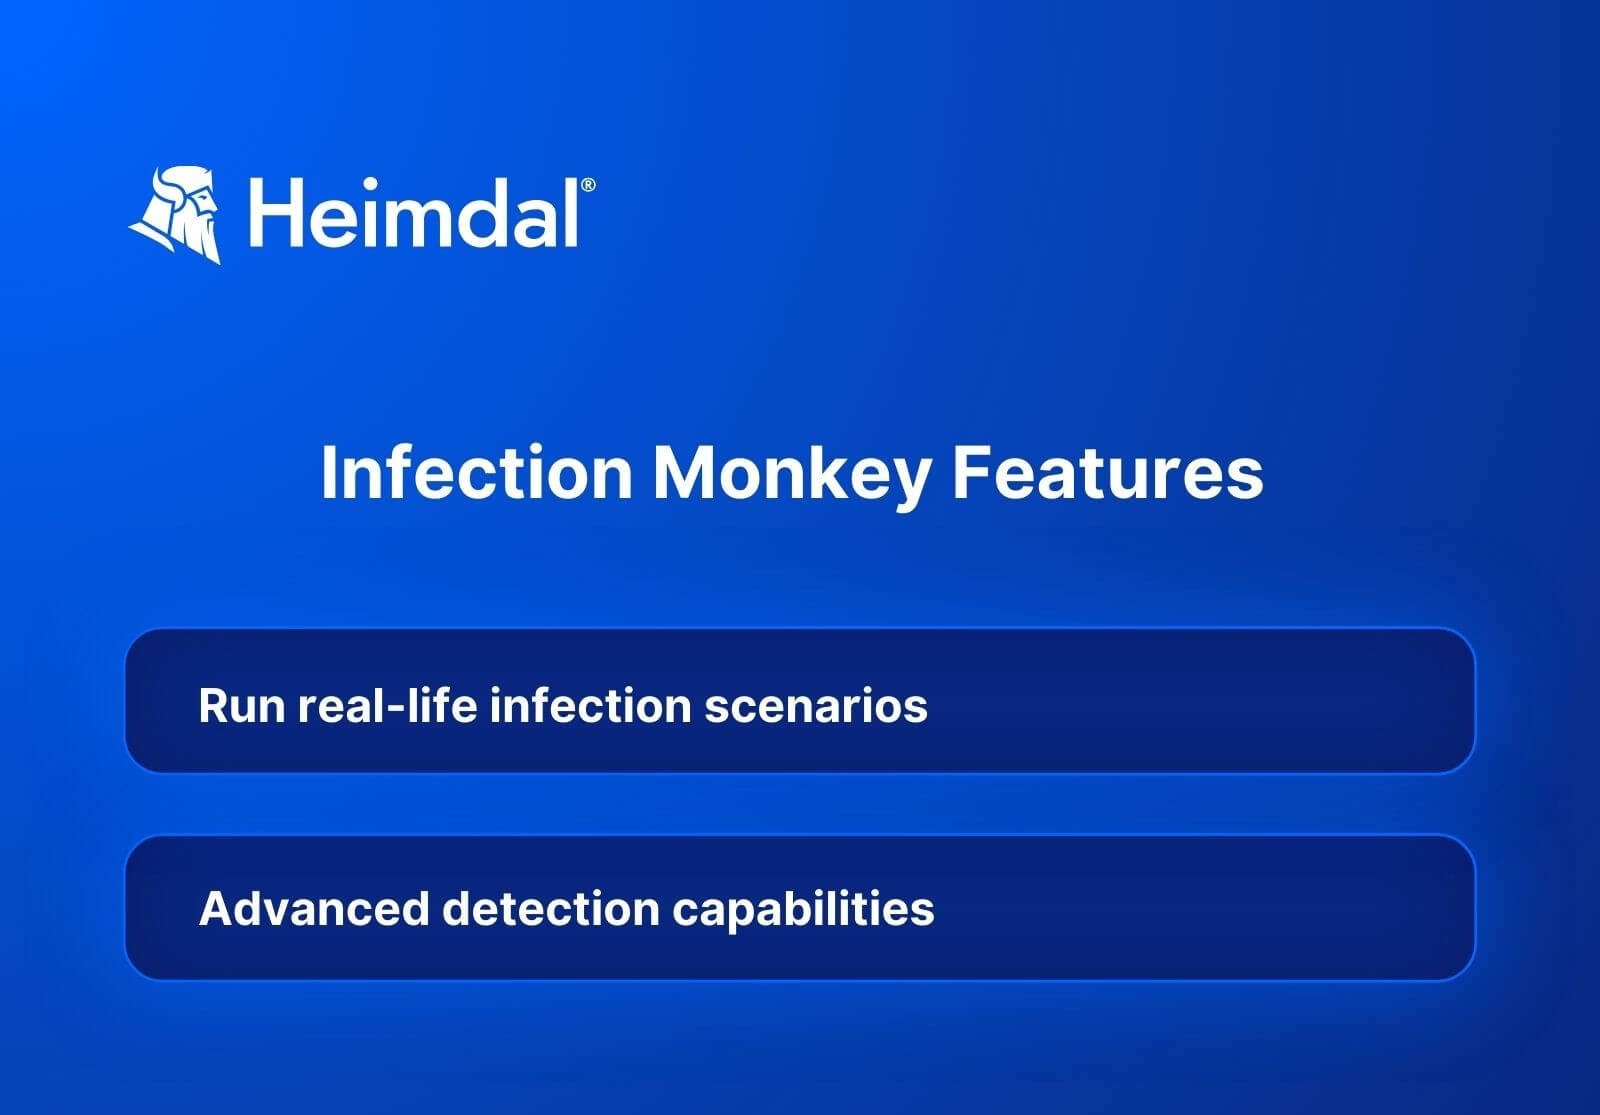 Infection Monkey Features